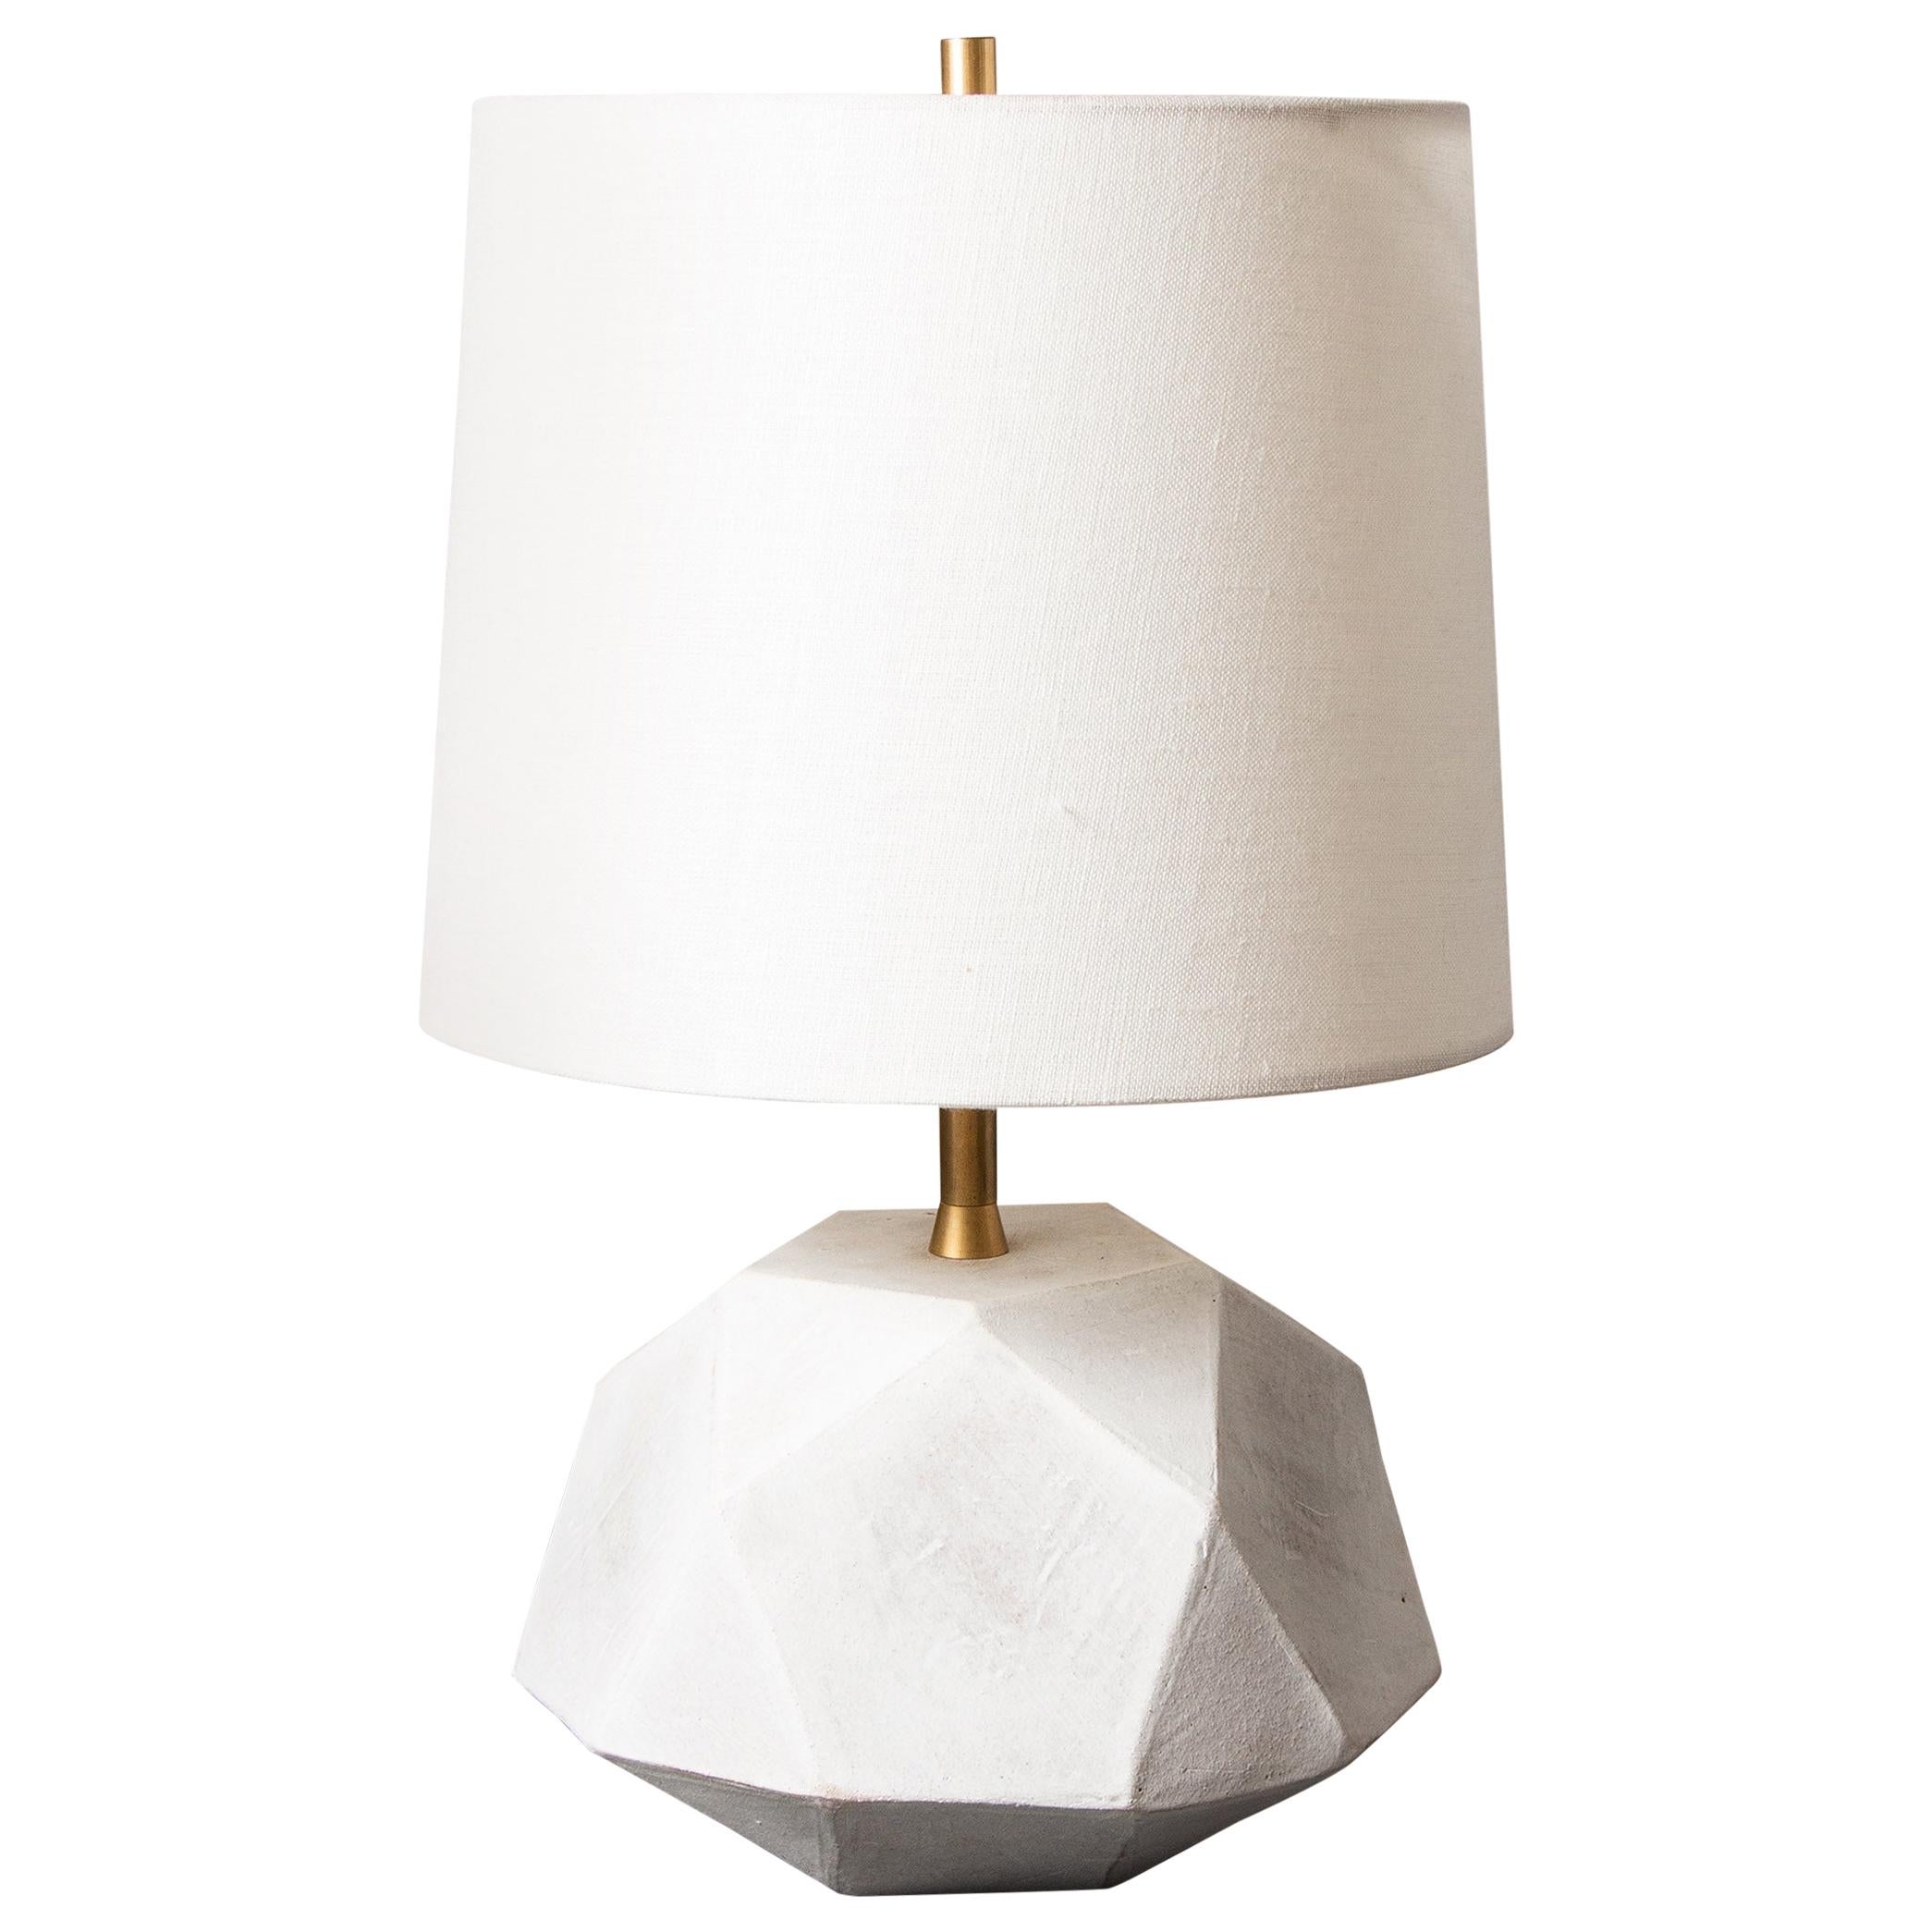 'Geode' Small Geometric White Ceramic and Brass Table Lamp For Sale